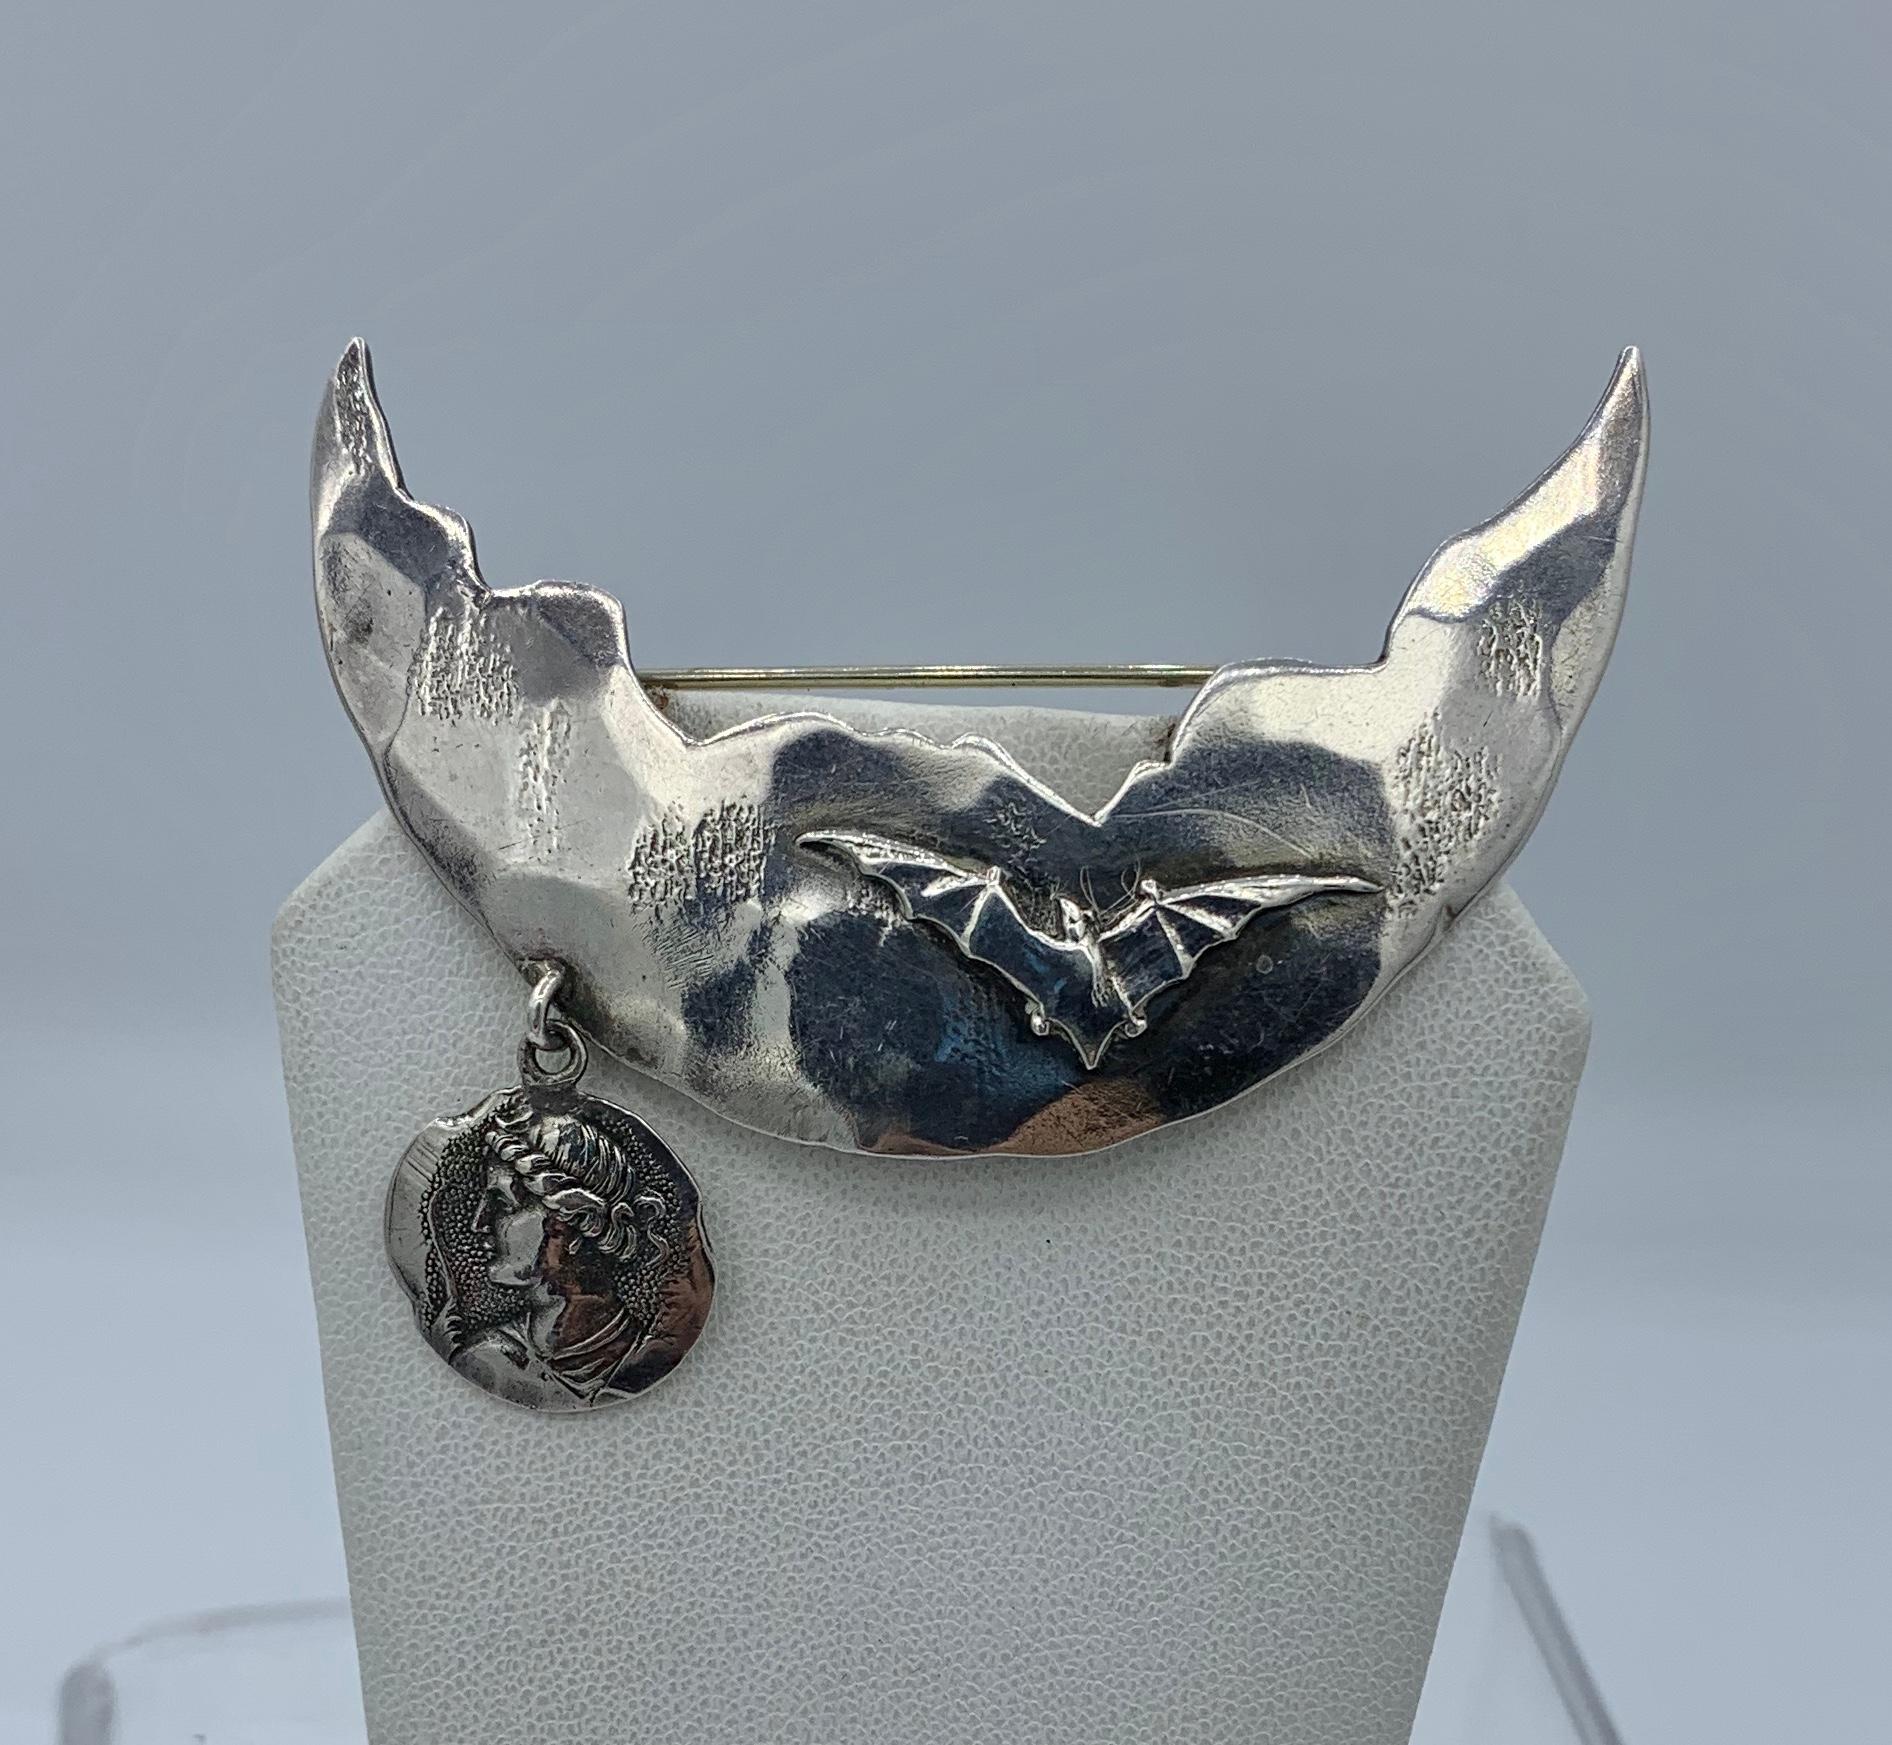 This is an extraordinary Brooch by George W. Shiebler and Company in the form of a moon with a bat flying across the moon with one of Shiebler's iconic Homeric pendants hanging from the moon.  The absolutely wonderful design in Sterling Silver with